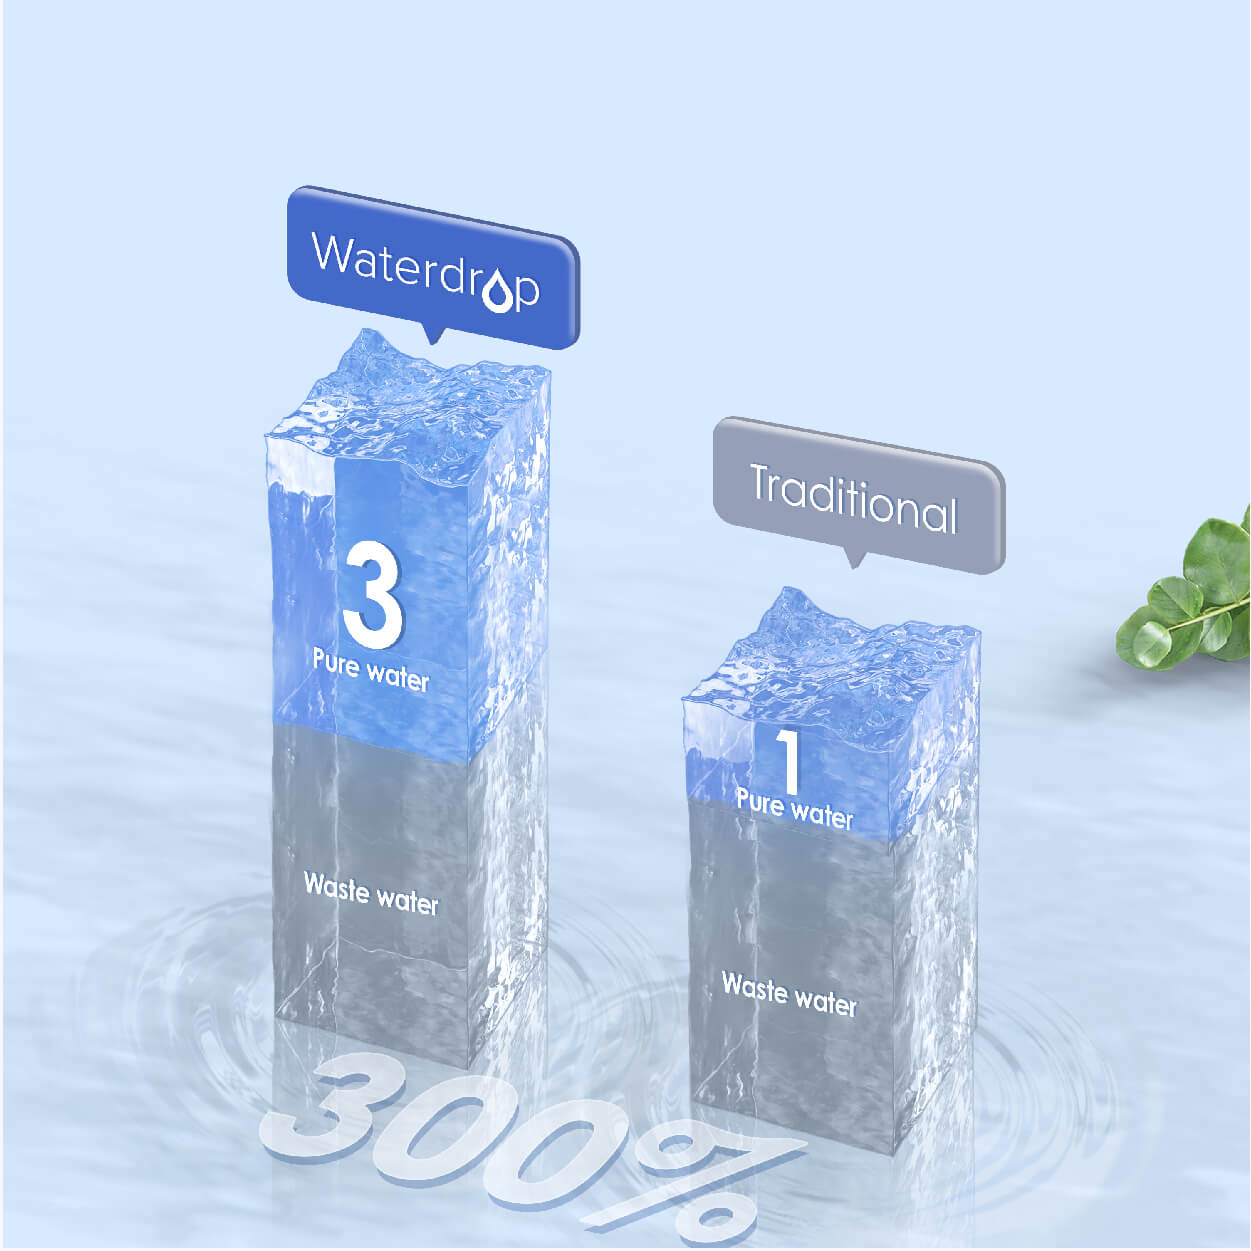 Filtered Water Increased By 300%